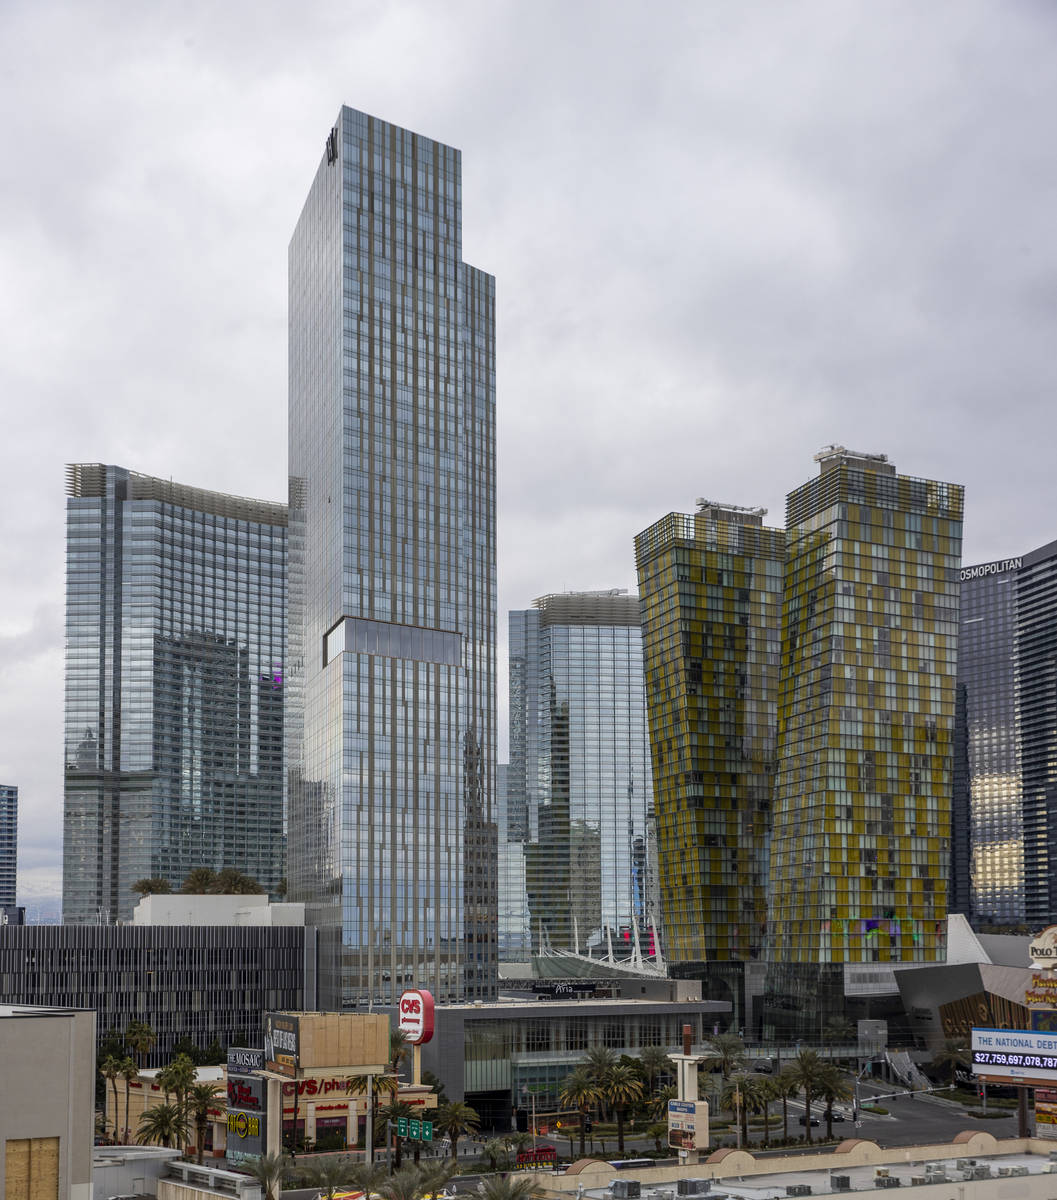 The Waldorf Astoria, center, and the Veer towers, right, are some of the condos about the Las V ...